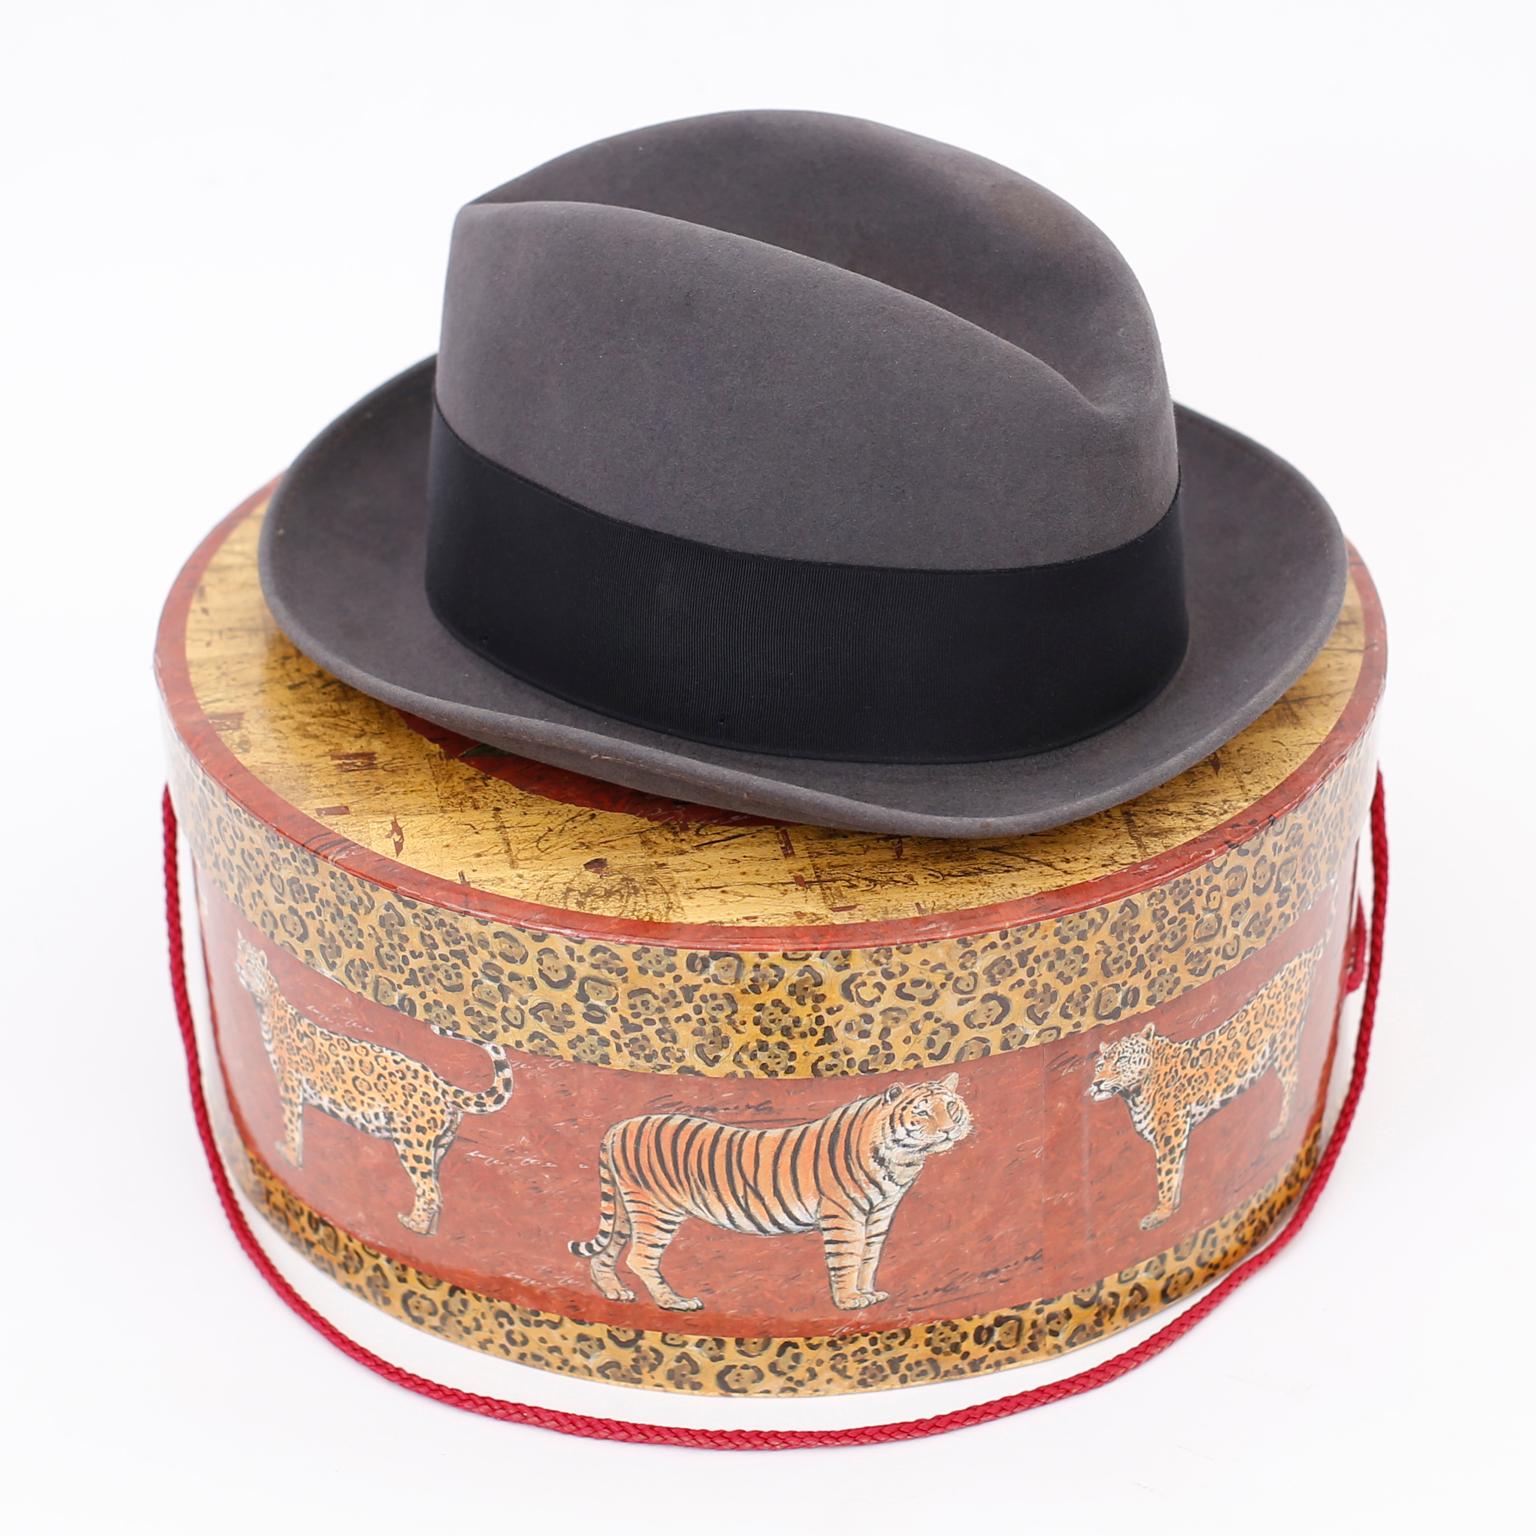 1950's men's grey fedora from Henry the Hatter since 1893 complete with a feather and a hat box decorated with big cats and jungle print. 

Hat size: 7.5.